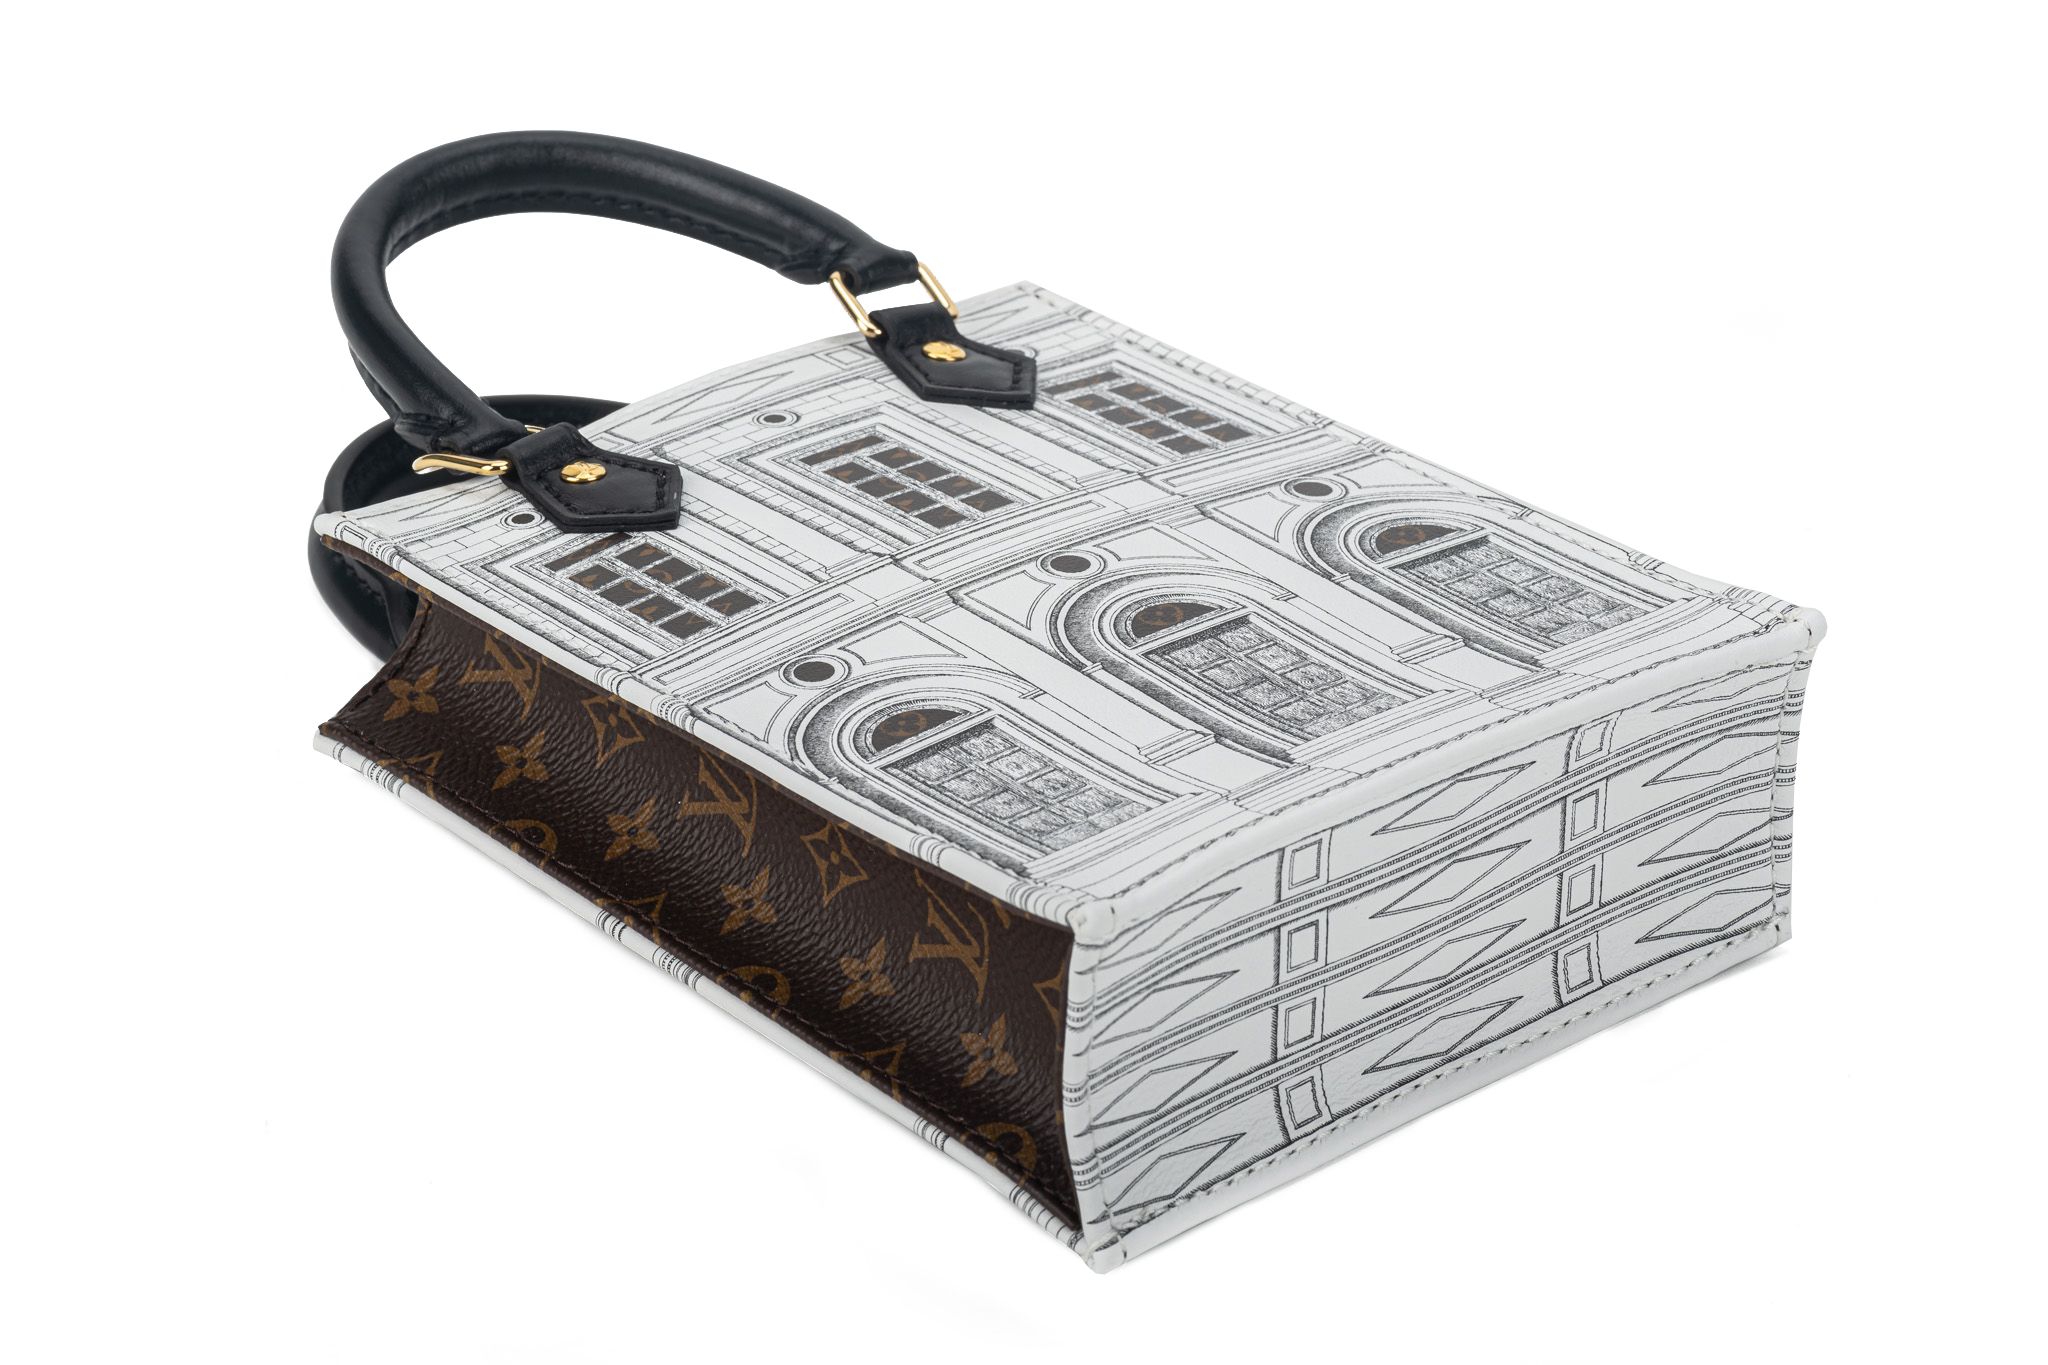 Louis Vuitton Limited Edition Fornasetti Sac Plat Bag